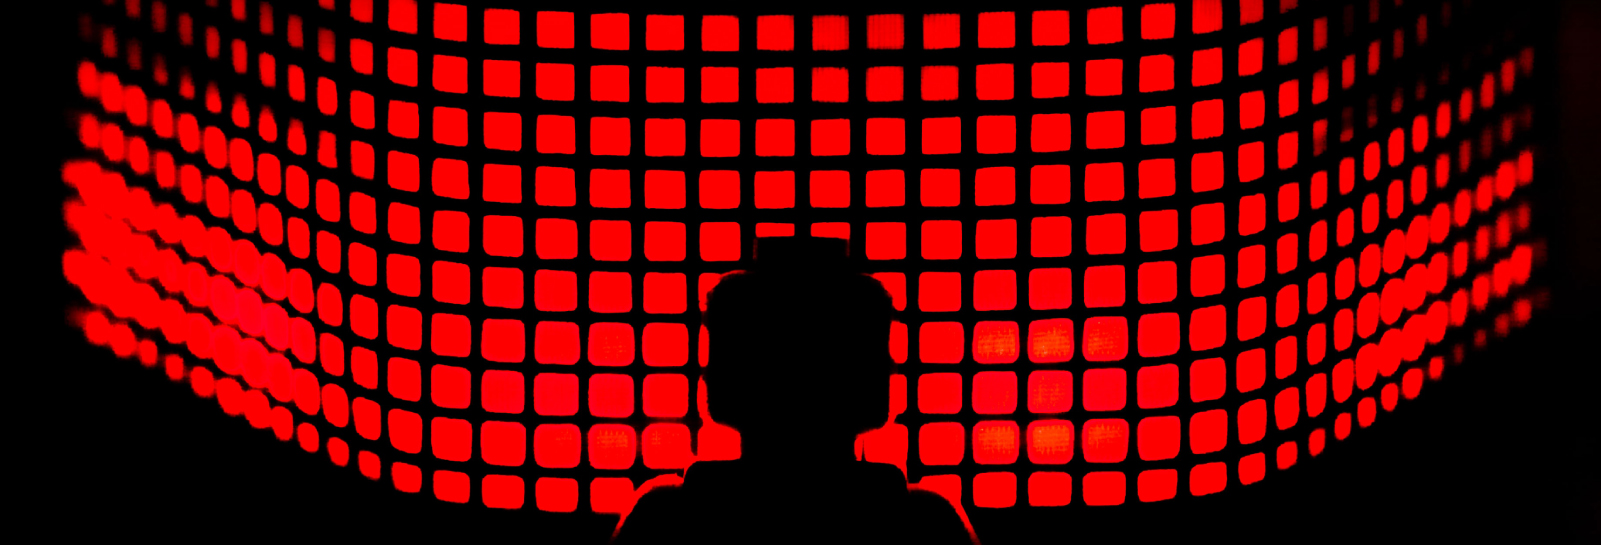 abstract red square shapes and silhouette of a lego minifigure